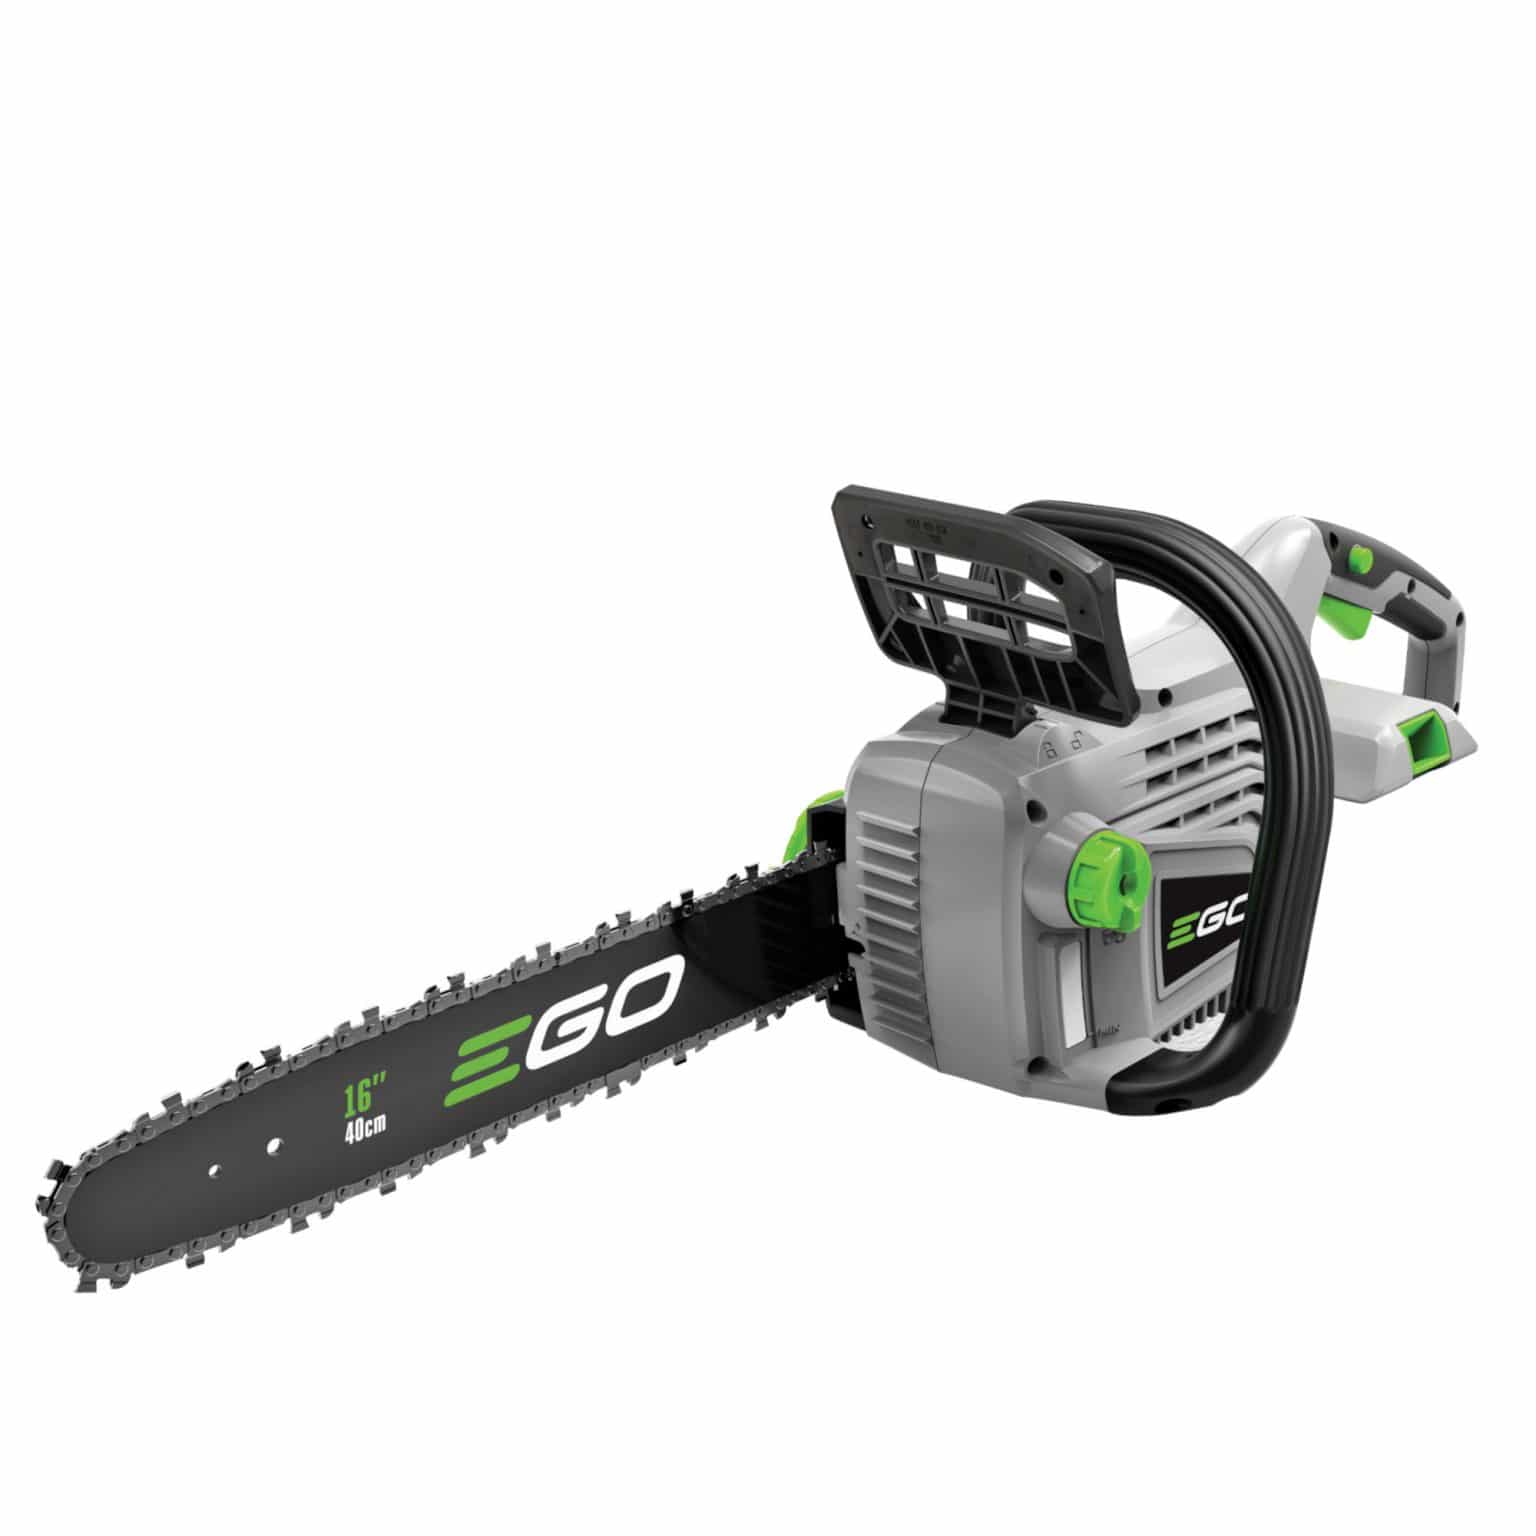 EGO C1610E battery chainsaw with 16" bar